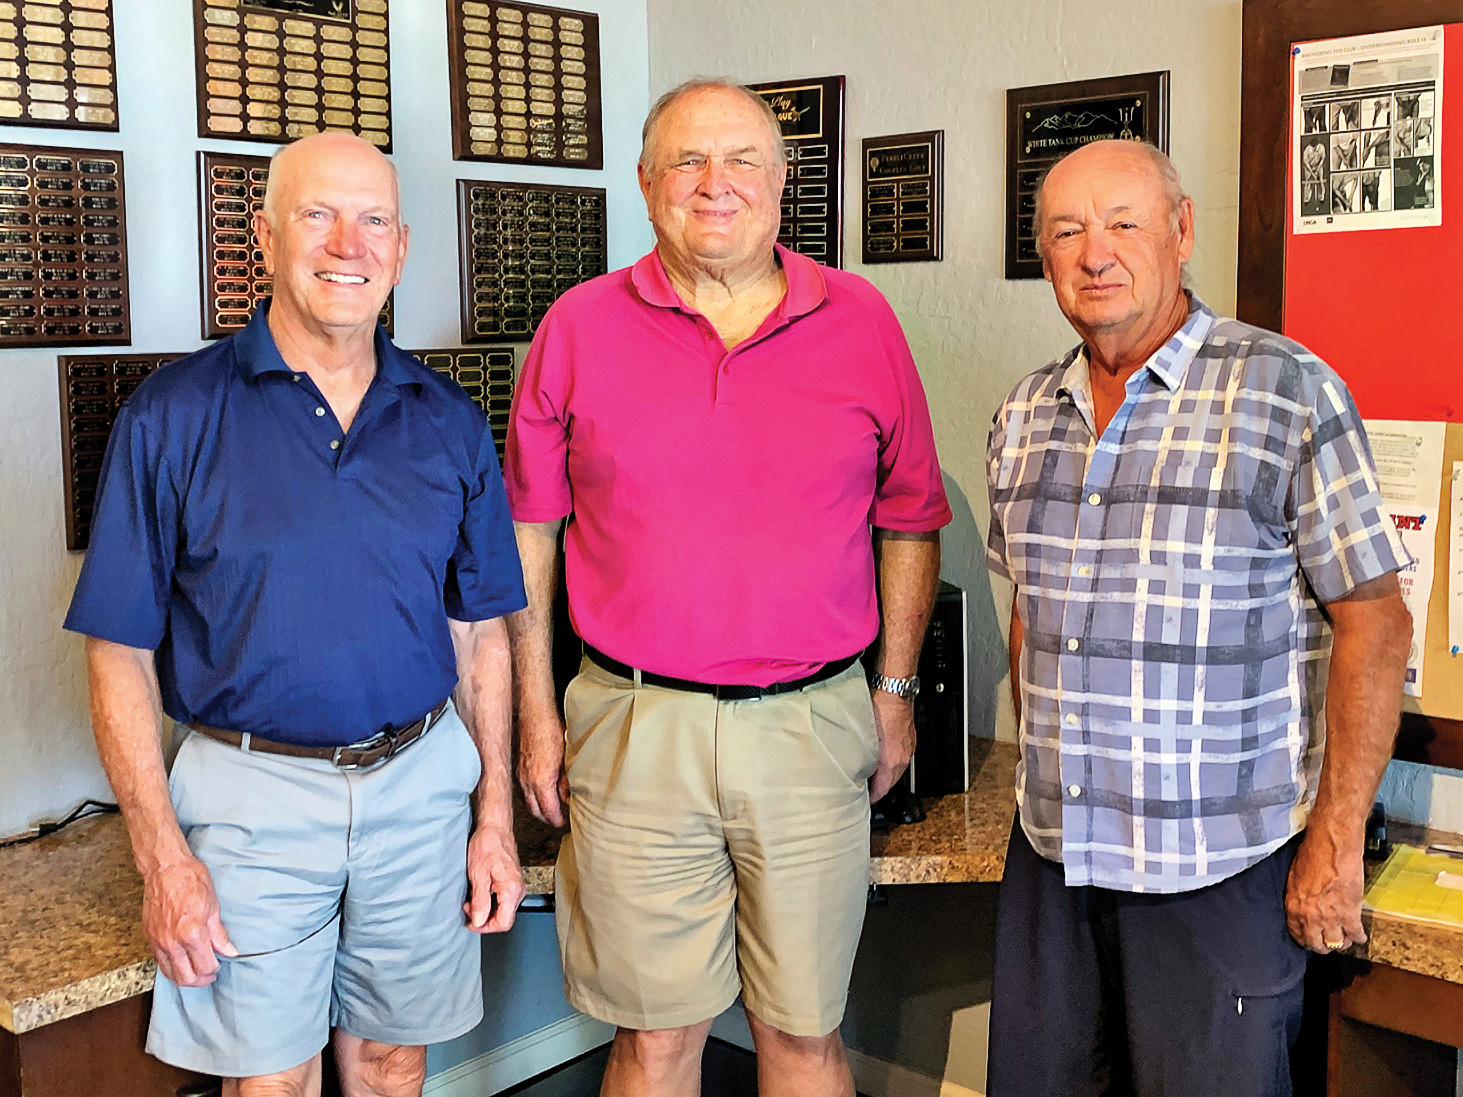 PCMGA Matchplay Tourney Organization Team (left to right): Clint Hull, Steve Straley, and Ken Schumacher